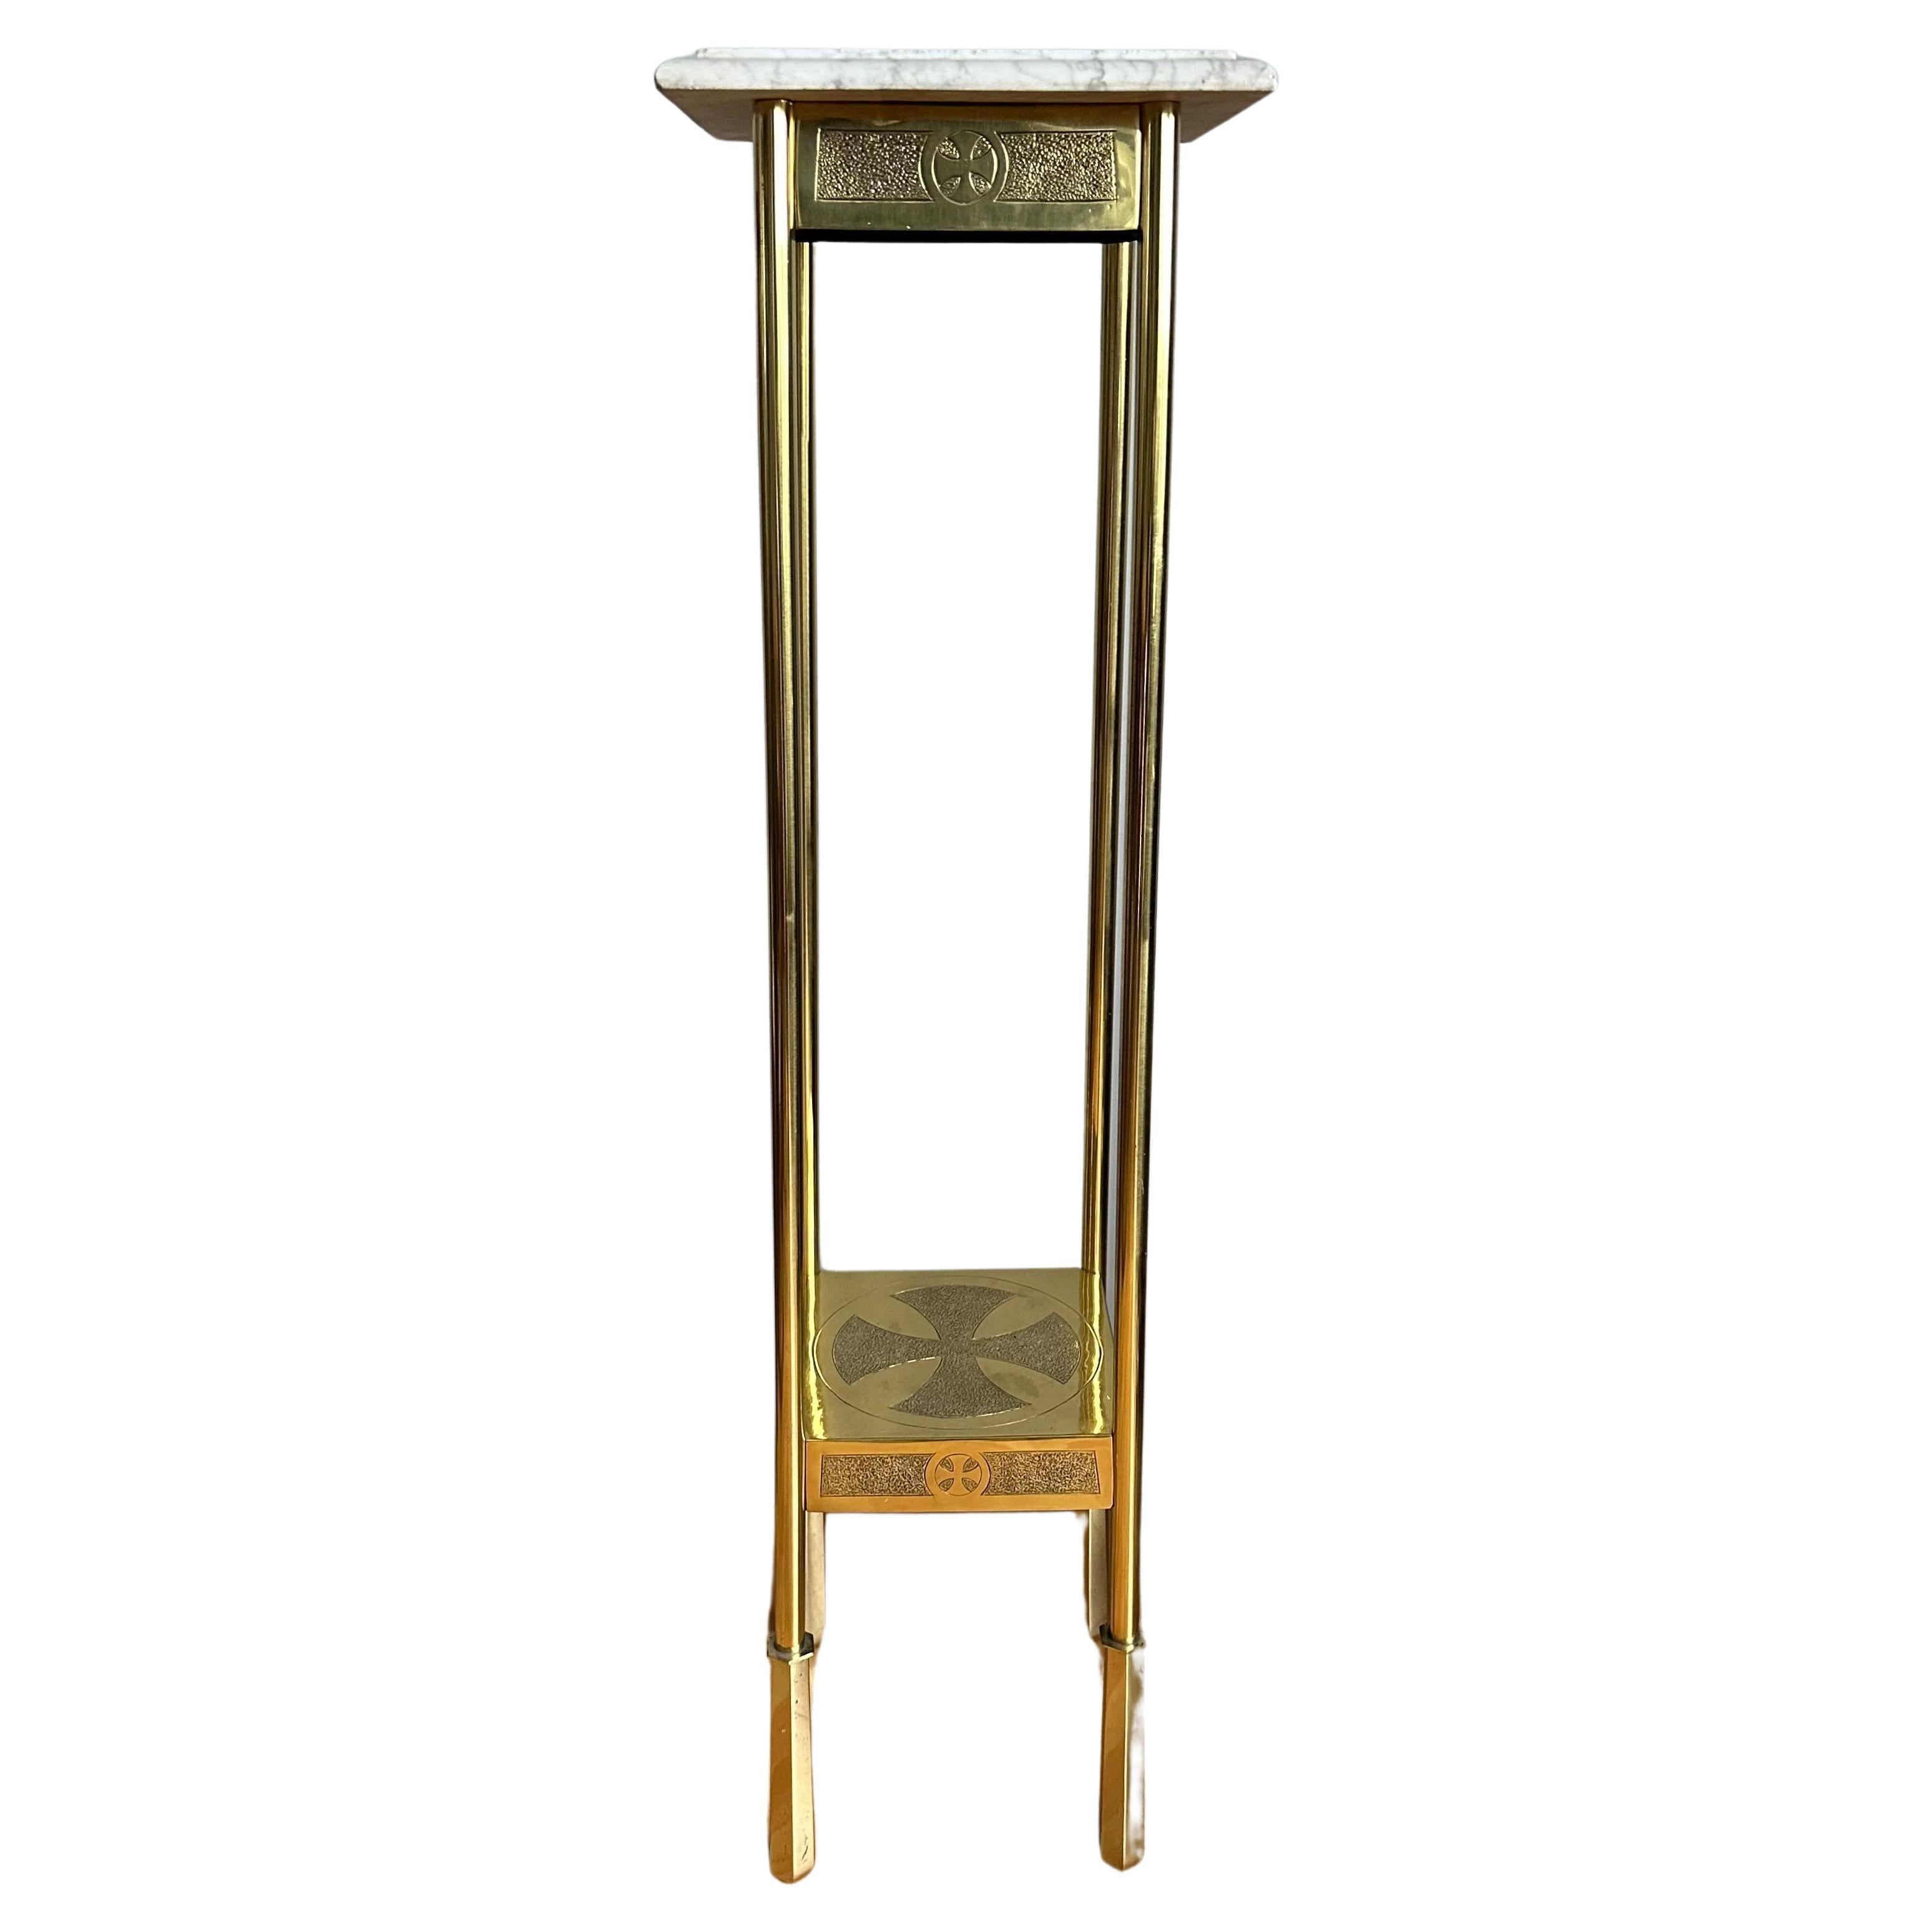 Superb quality and very good condition Gothic stand with an amazing, golden color finish.

If only the best and the rarest is good enough for you then this stunning church pedestal / table could be the perfect addition to your collection and/or